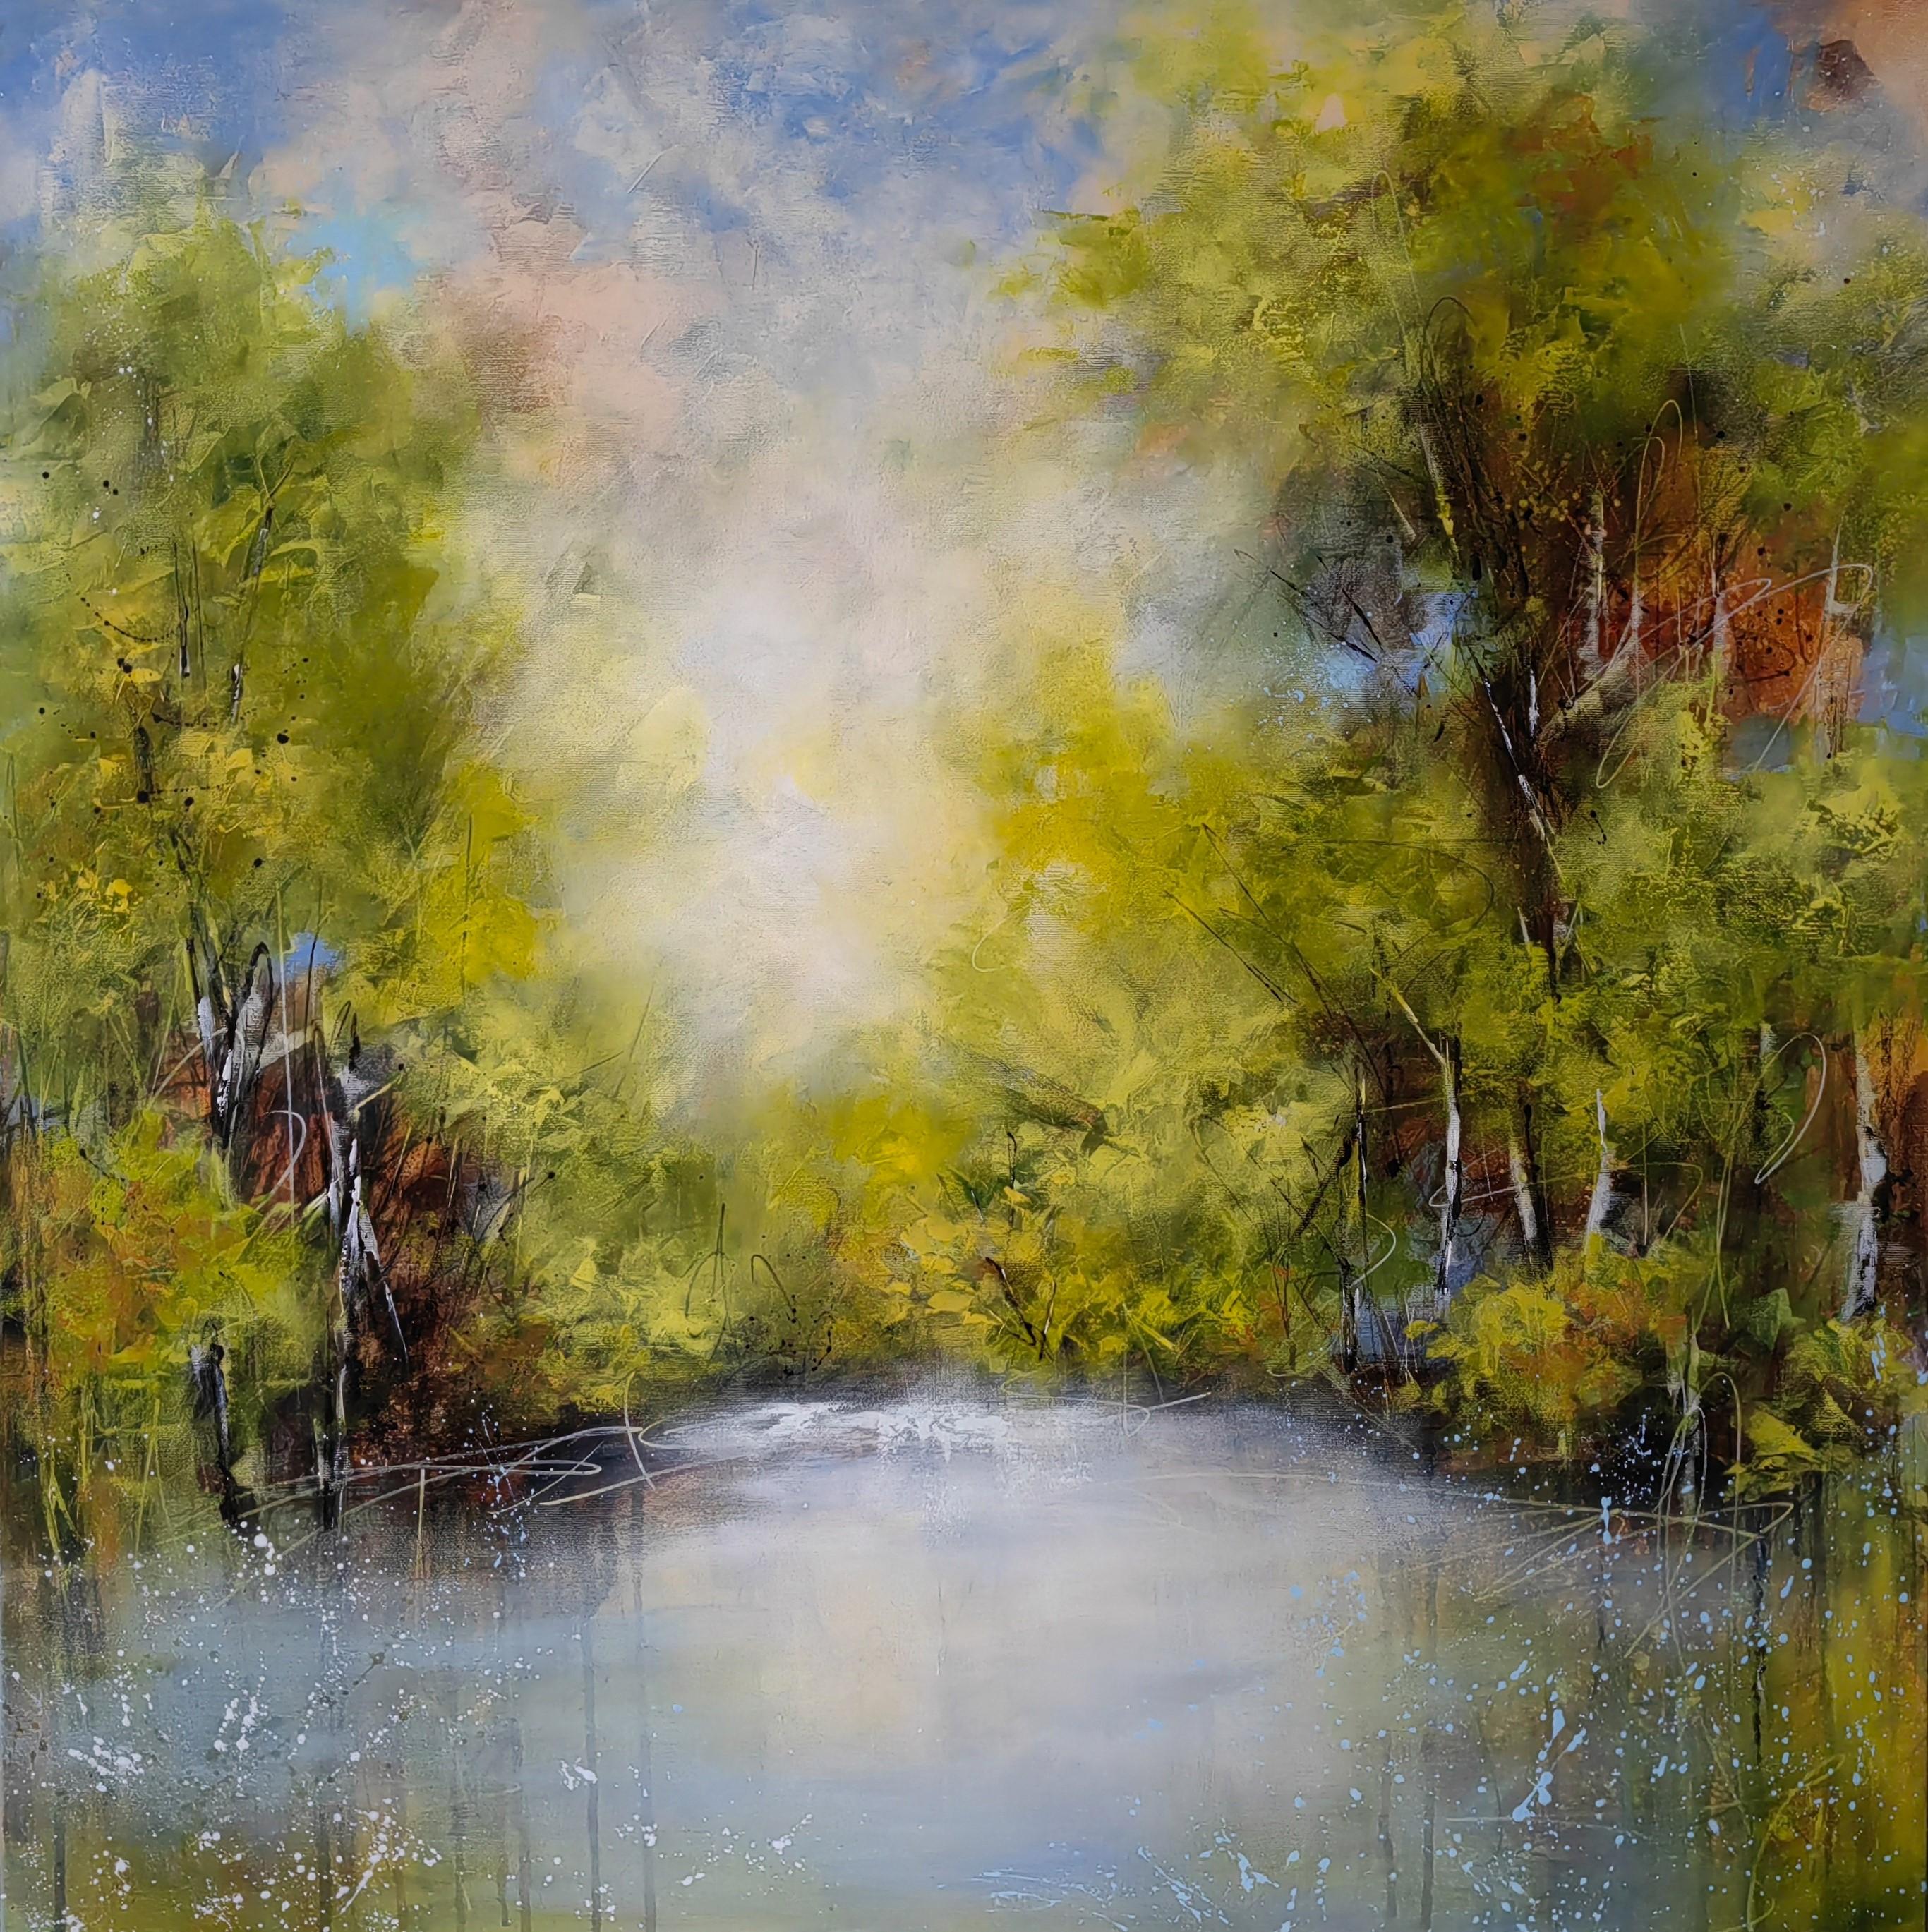 Vera Hoi Abstract Painting - "Spring is in the air" Contemporary impressionistic landscape painting